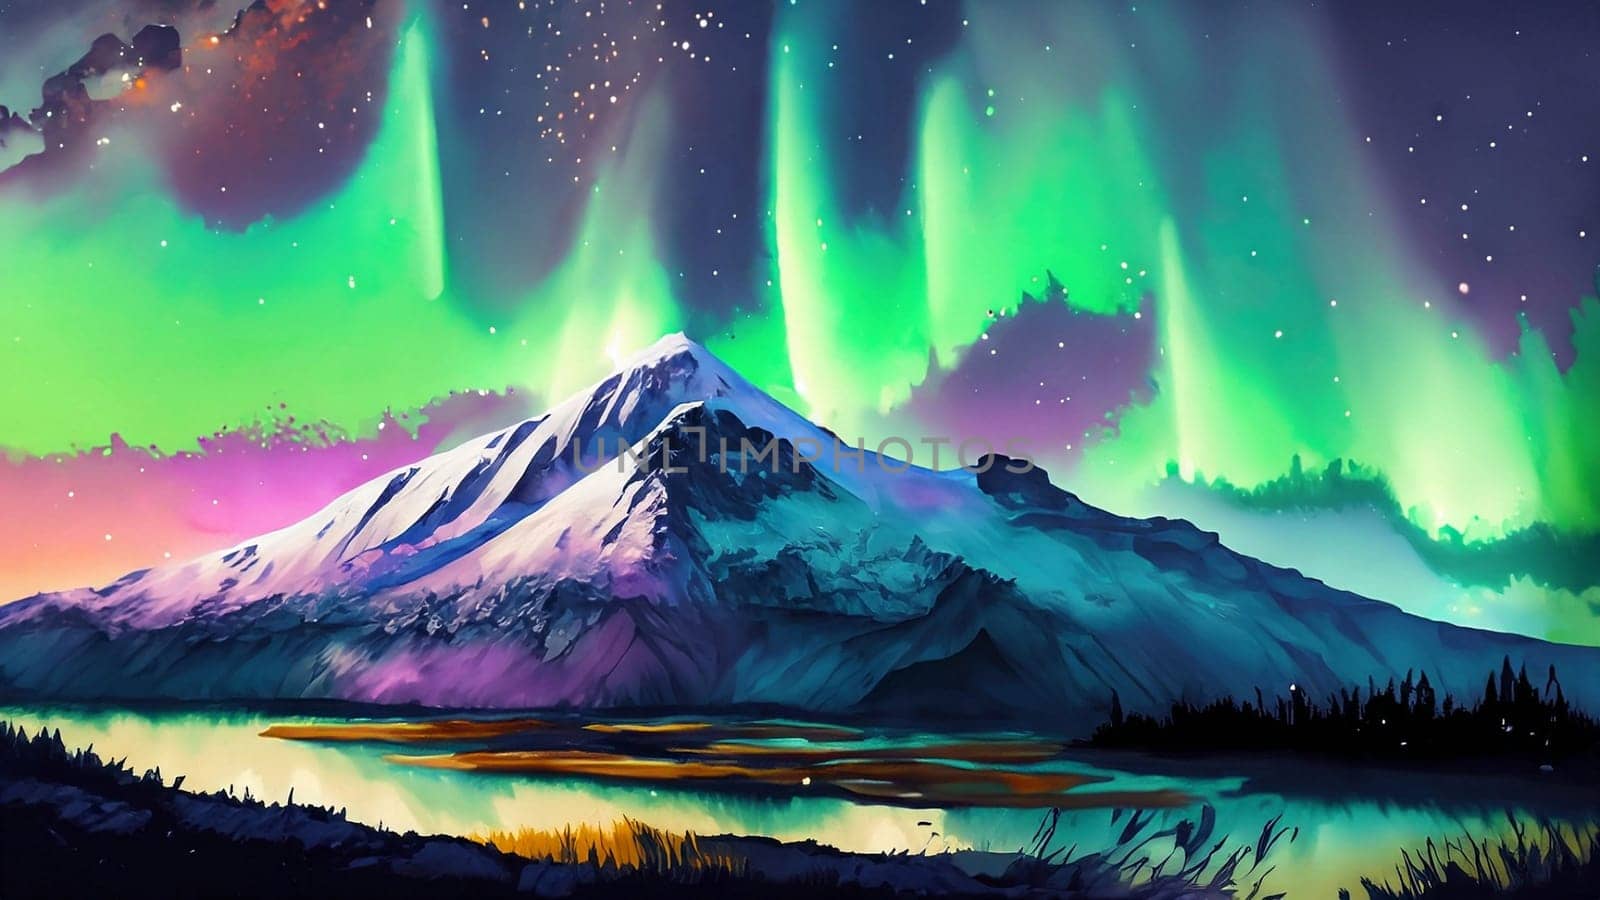 Northern lights in the night sky over the mountains. Abstract painting. Impressionist style. Imitation of oil painting. Painting for interior. Digital illustration. by Costin